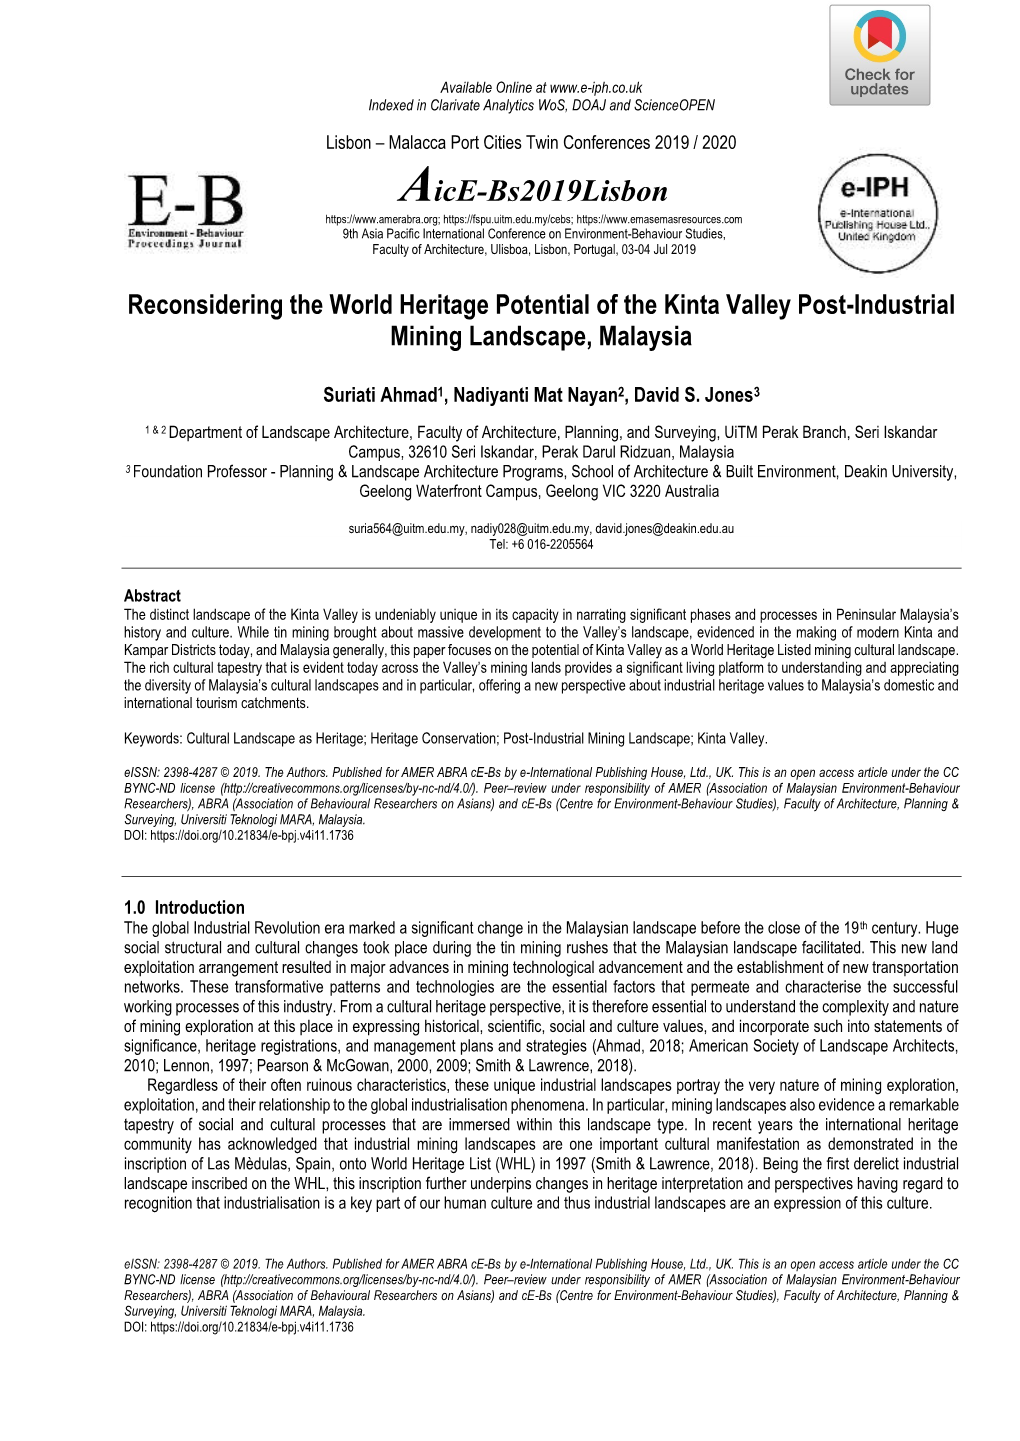 Reconsidering the World Heritage Potential of the Kinta Valley Post-Industrial Mining Landscape, Malaysia